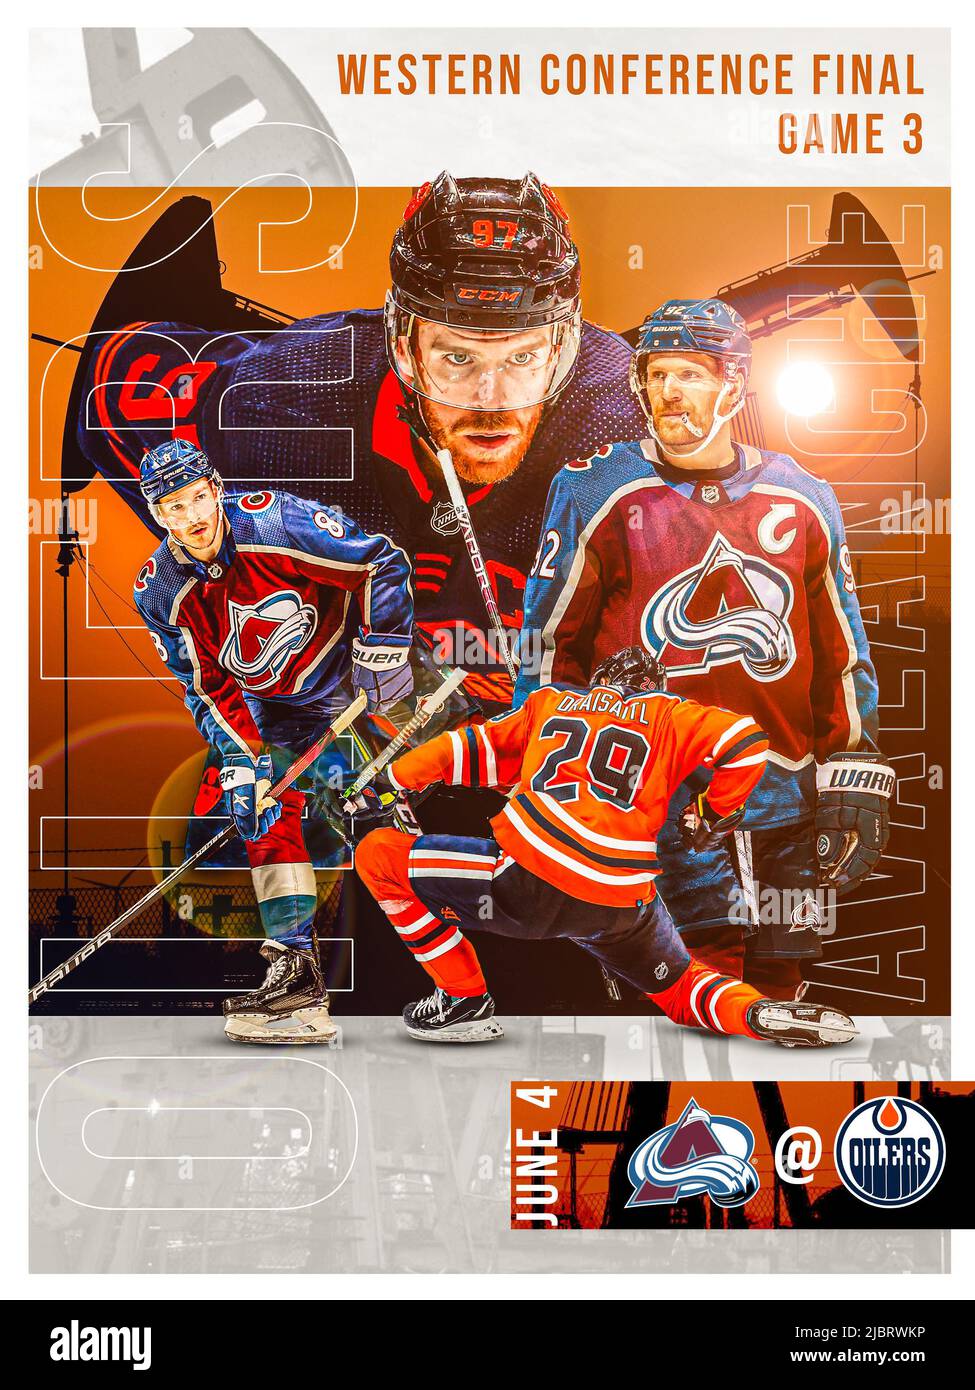 NHL Western Conference Final Game 2 Poster Stock Photo